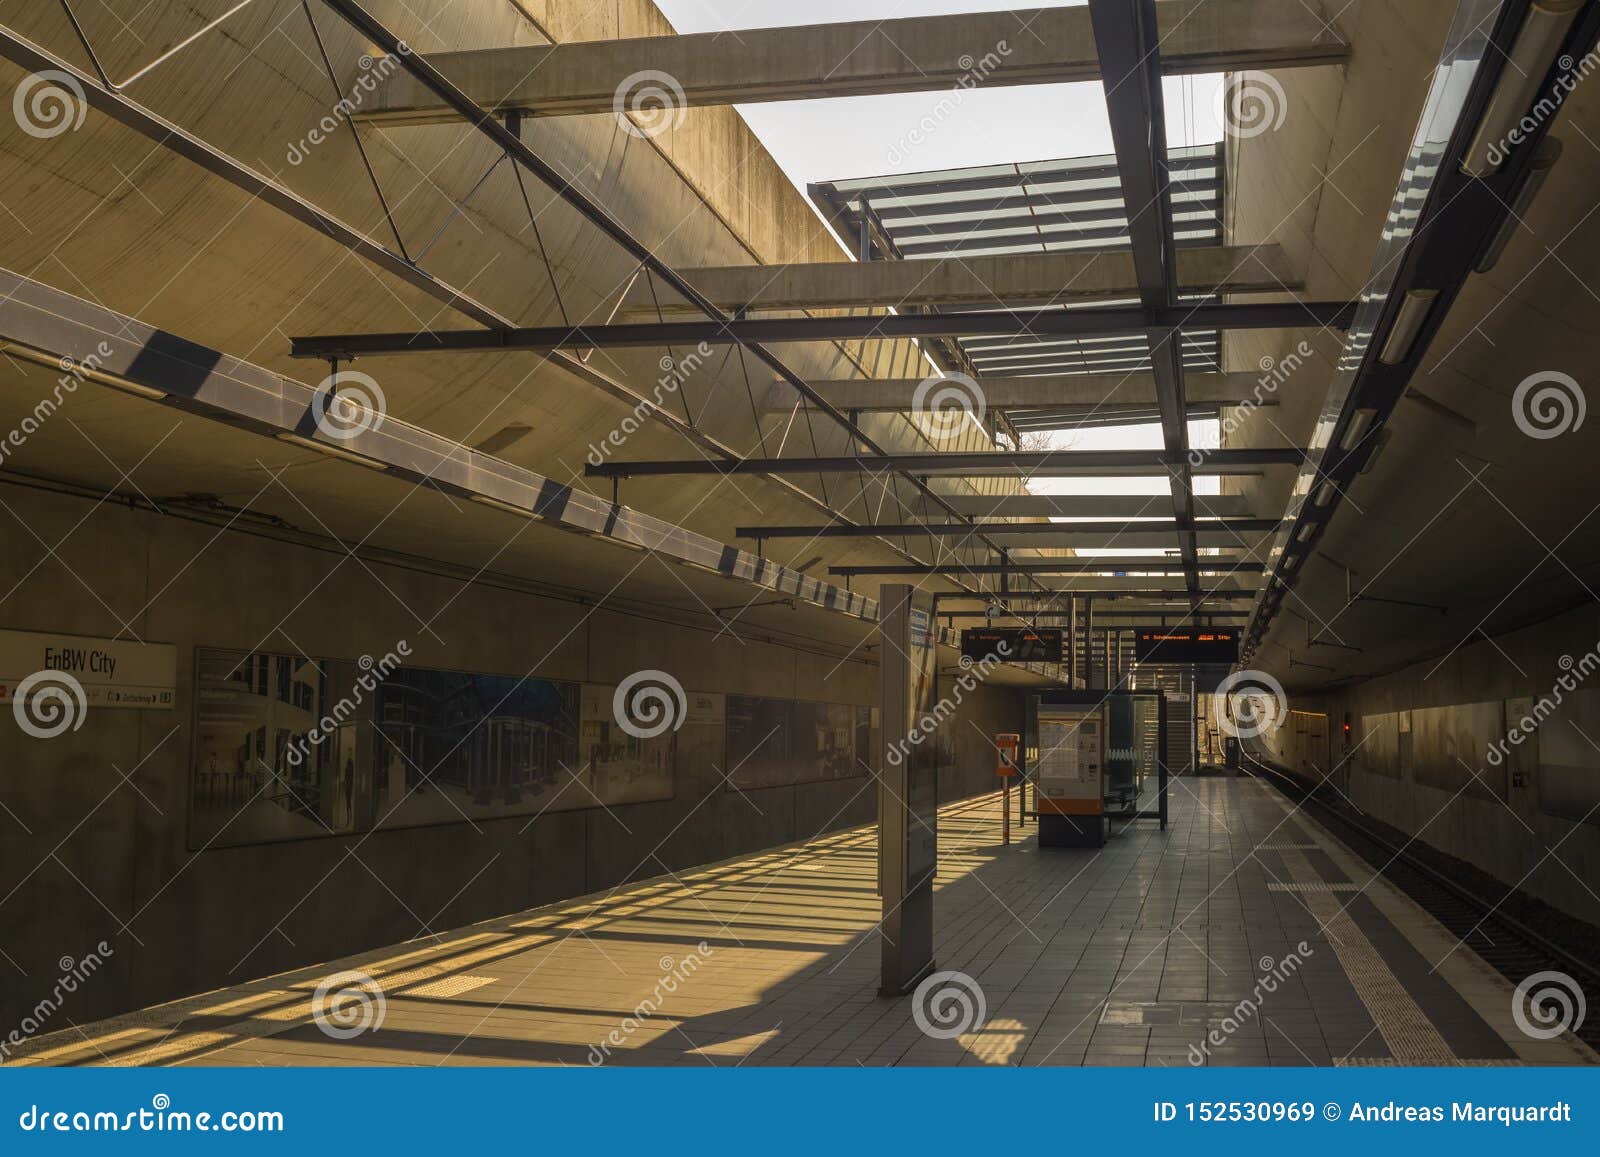 This is the Modern Tram Station EnBW City Editorial Stock Image - Image ...